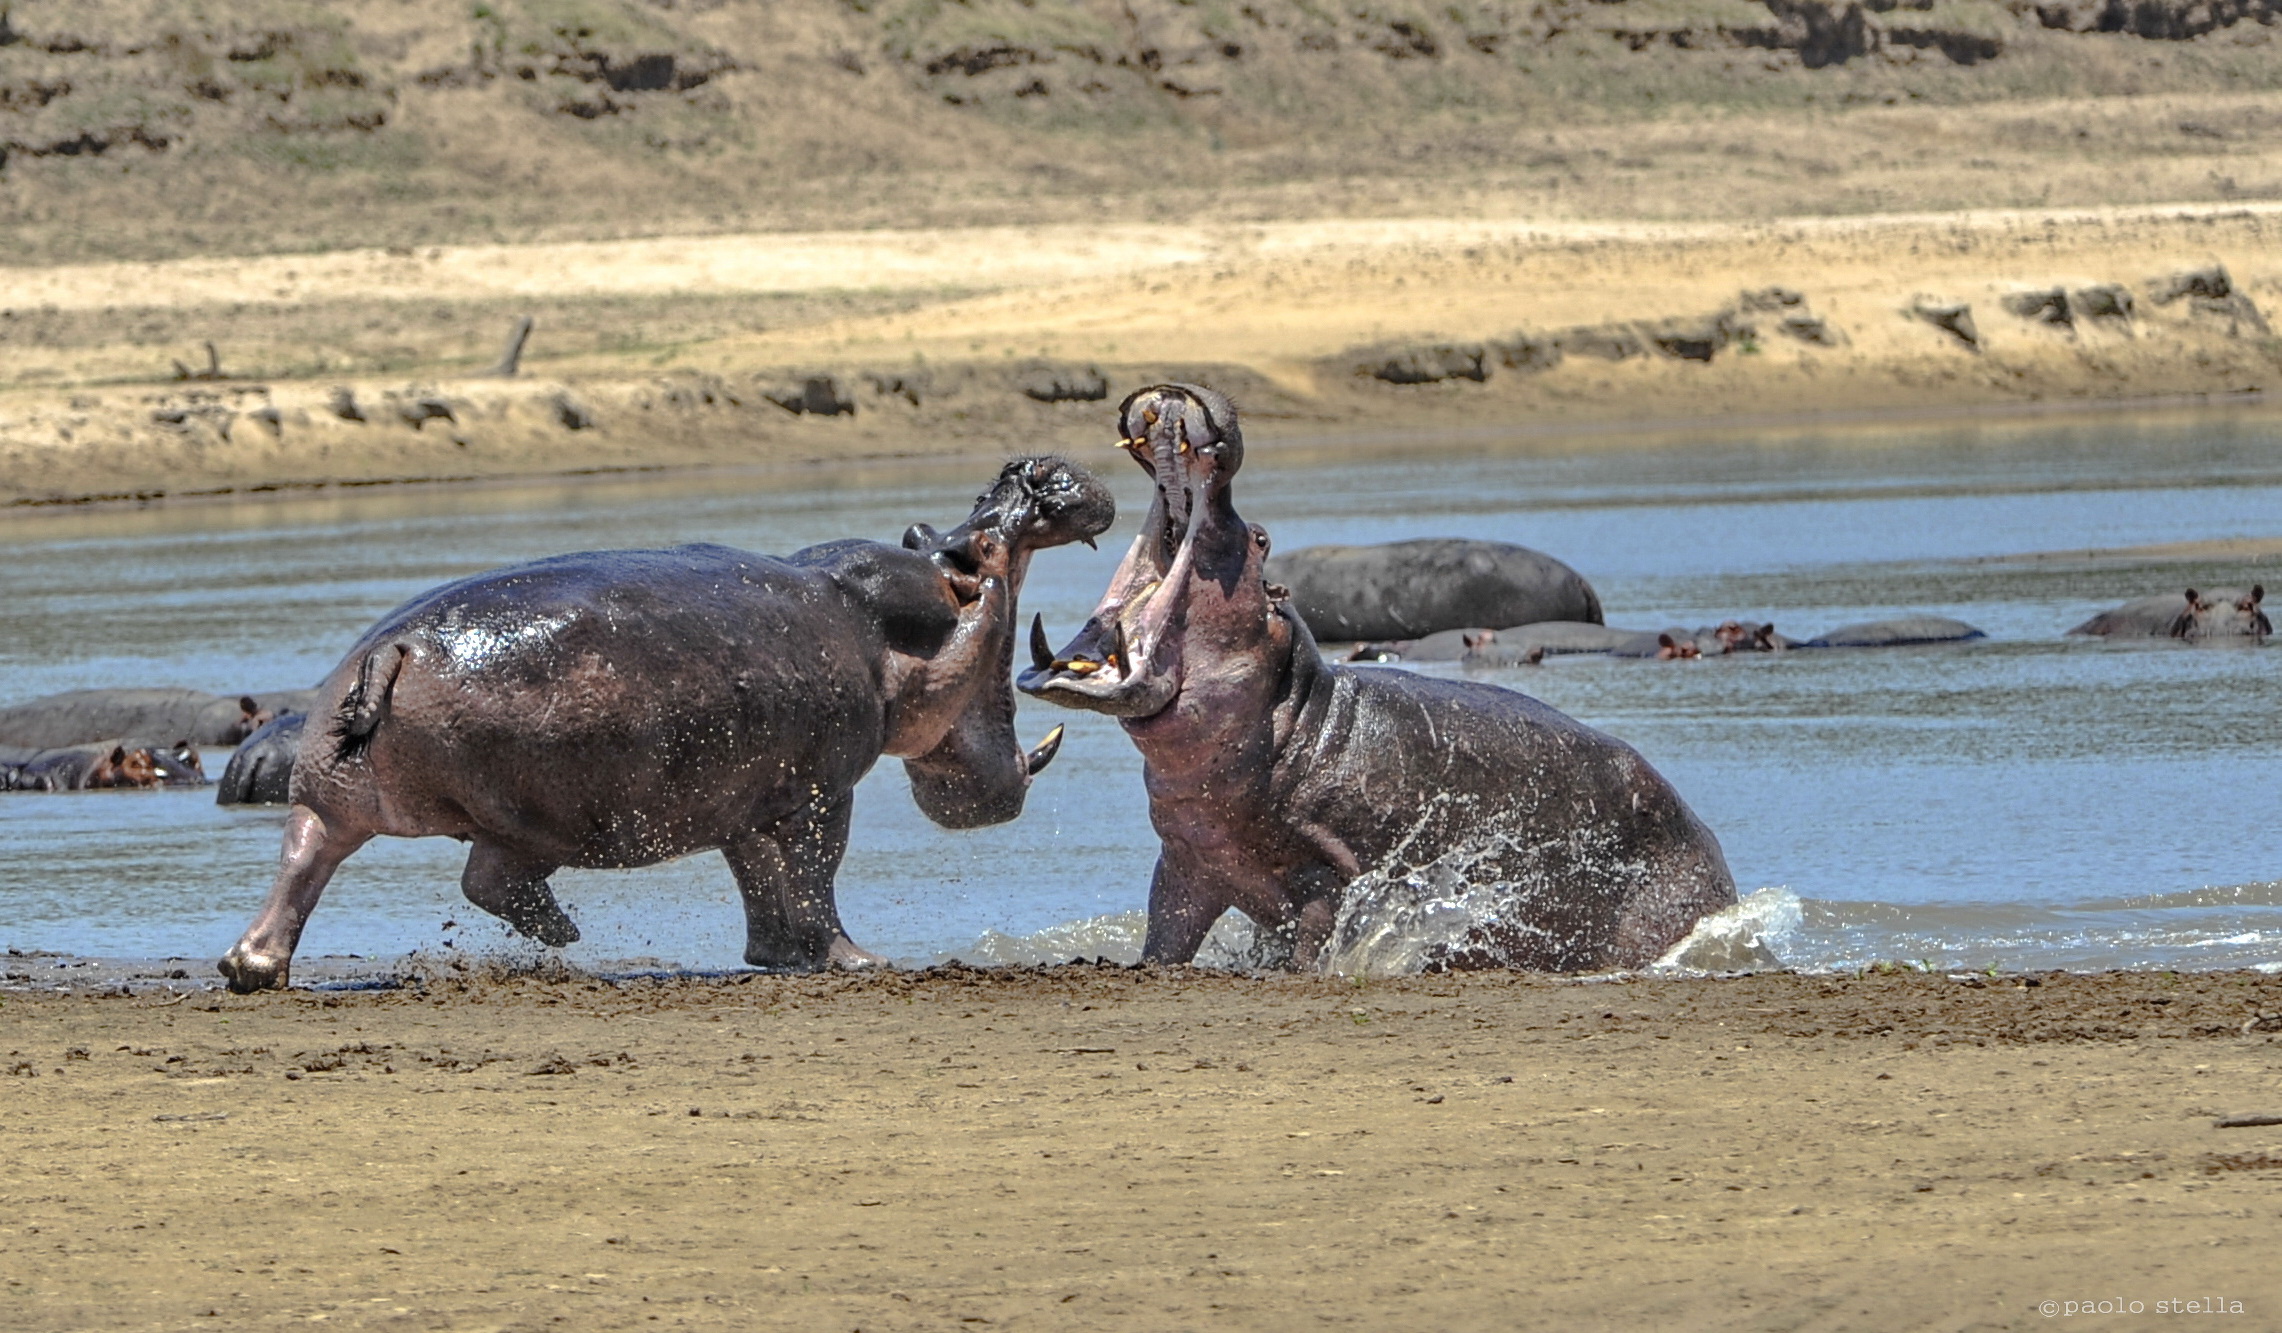 challenge among males in the Luangwa River...